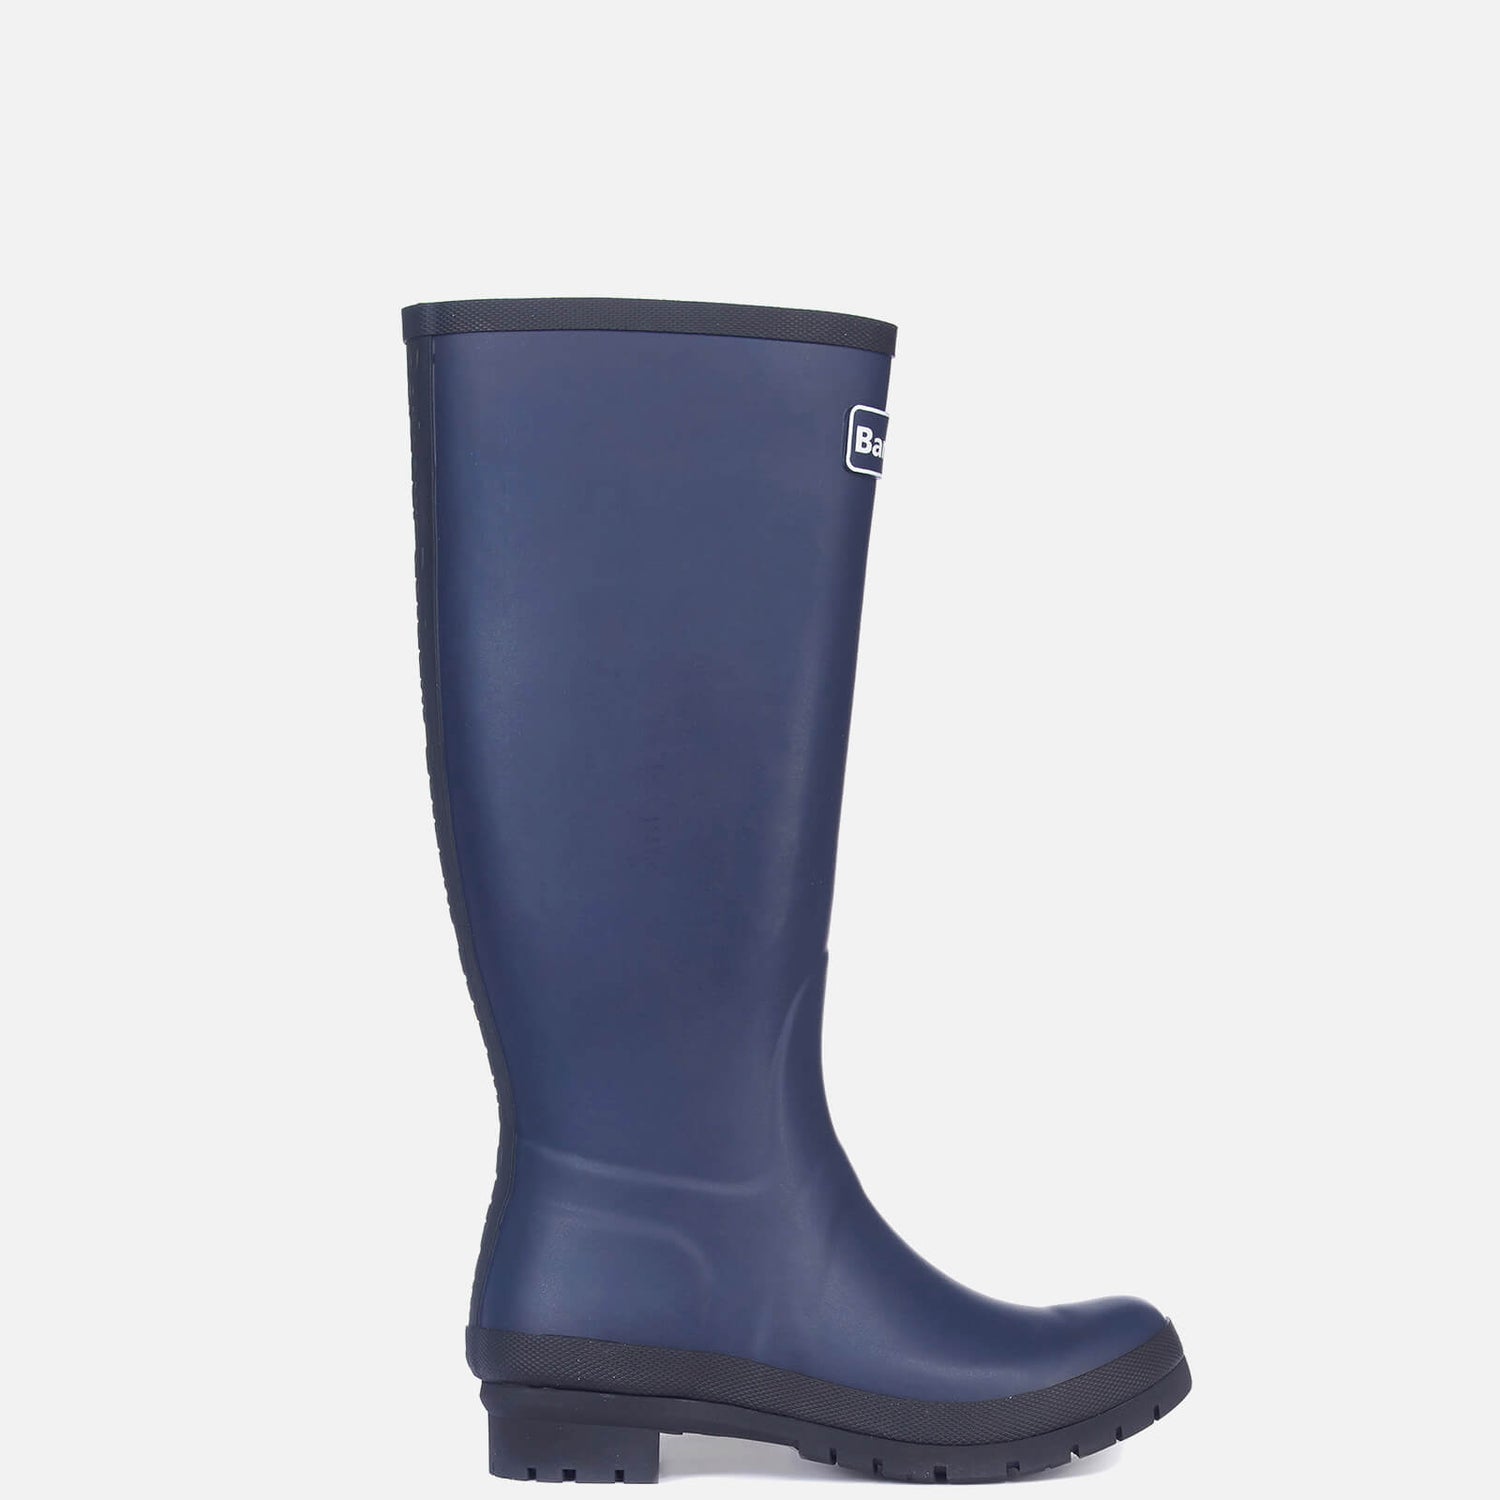 Barbour Women's Abbey Tall Wellies - Navy - UK 3